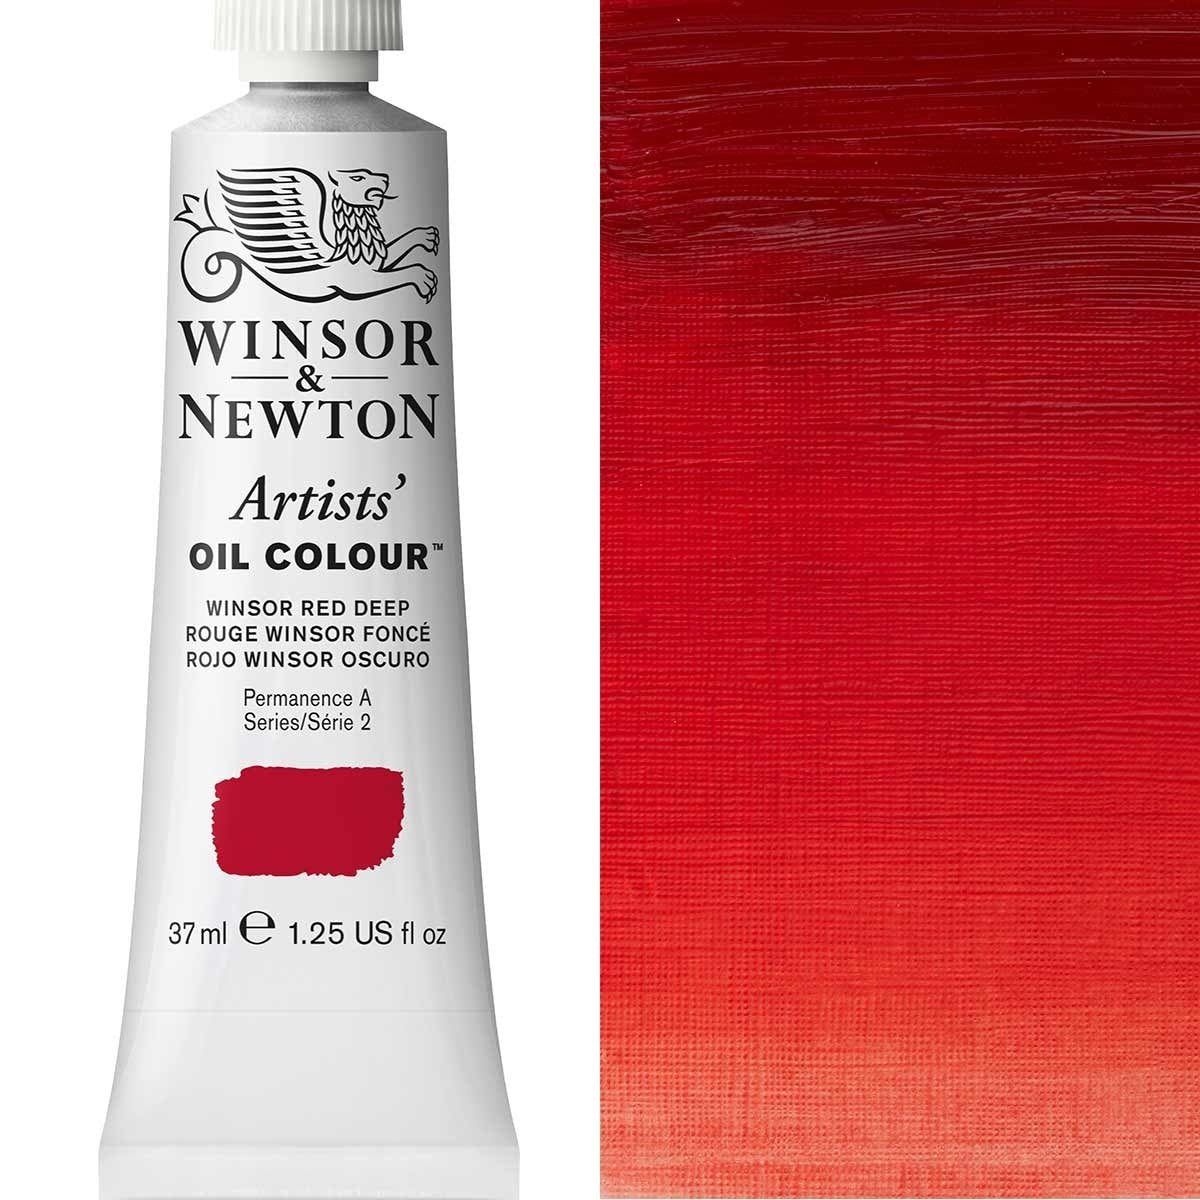 Winsor and Newton - Artists' Oil Colour - 37ml - Winsor Red Deep